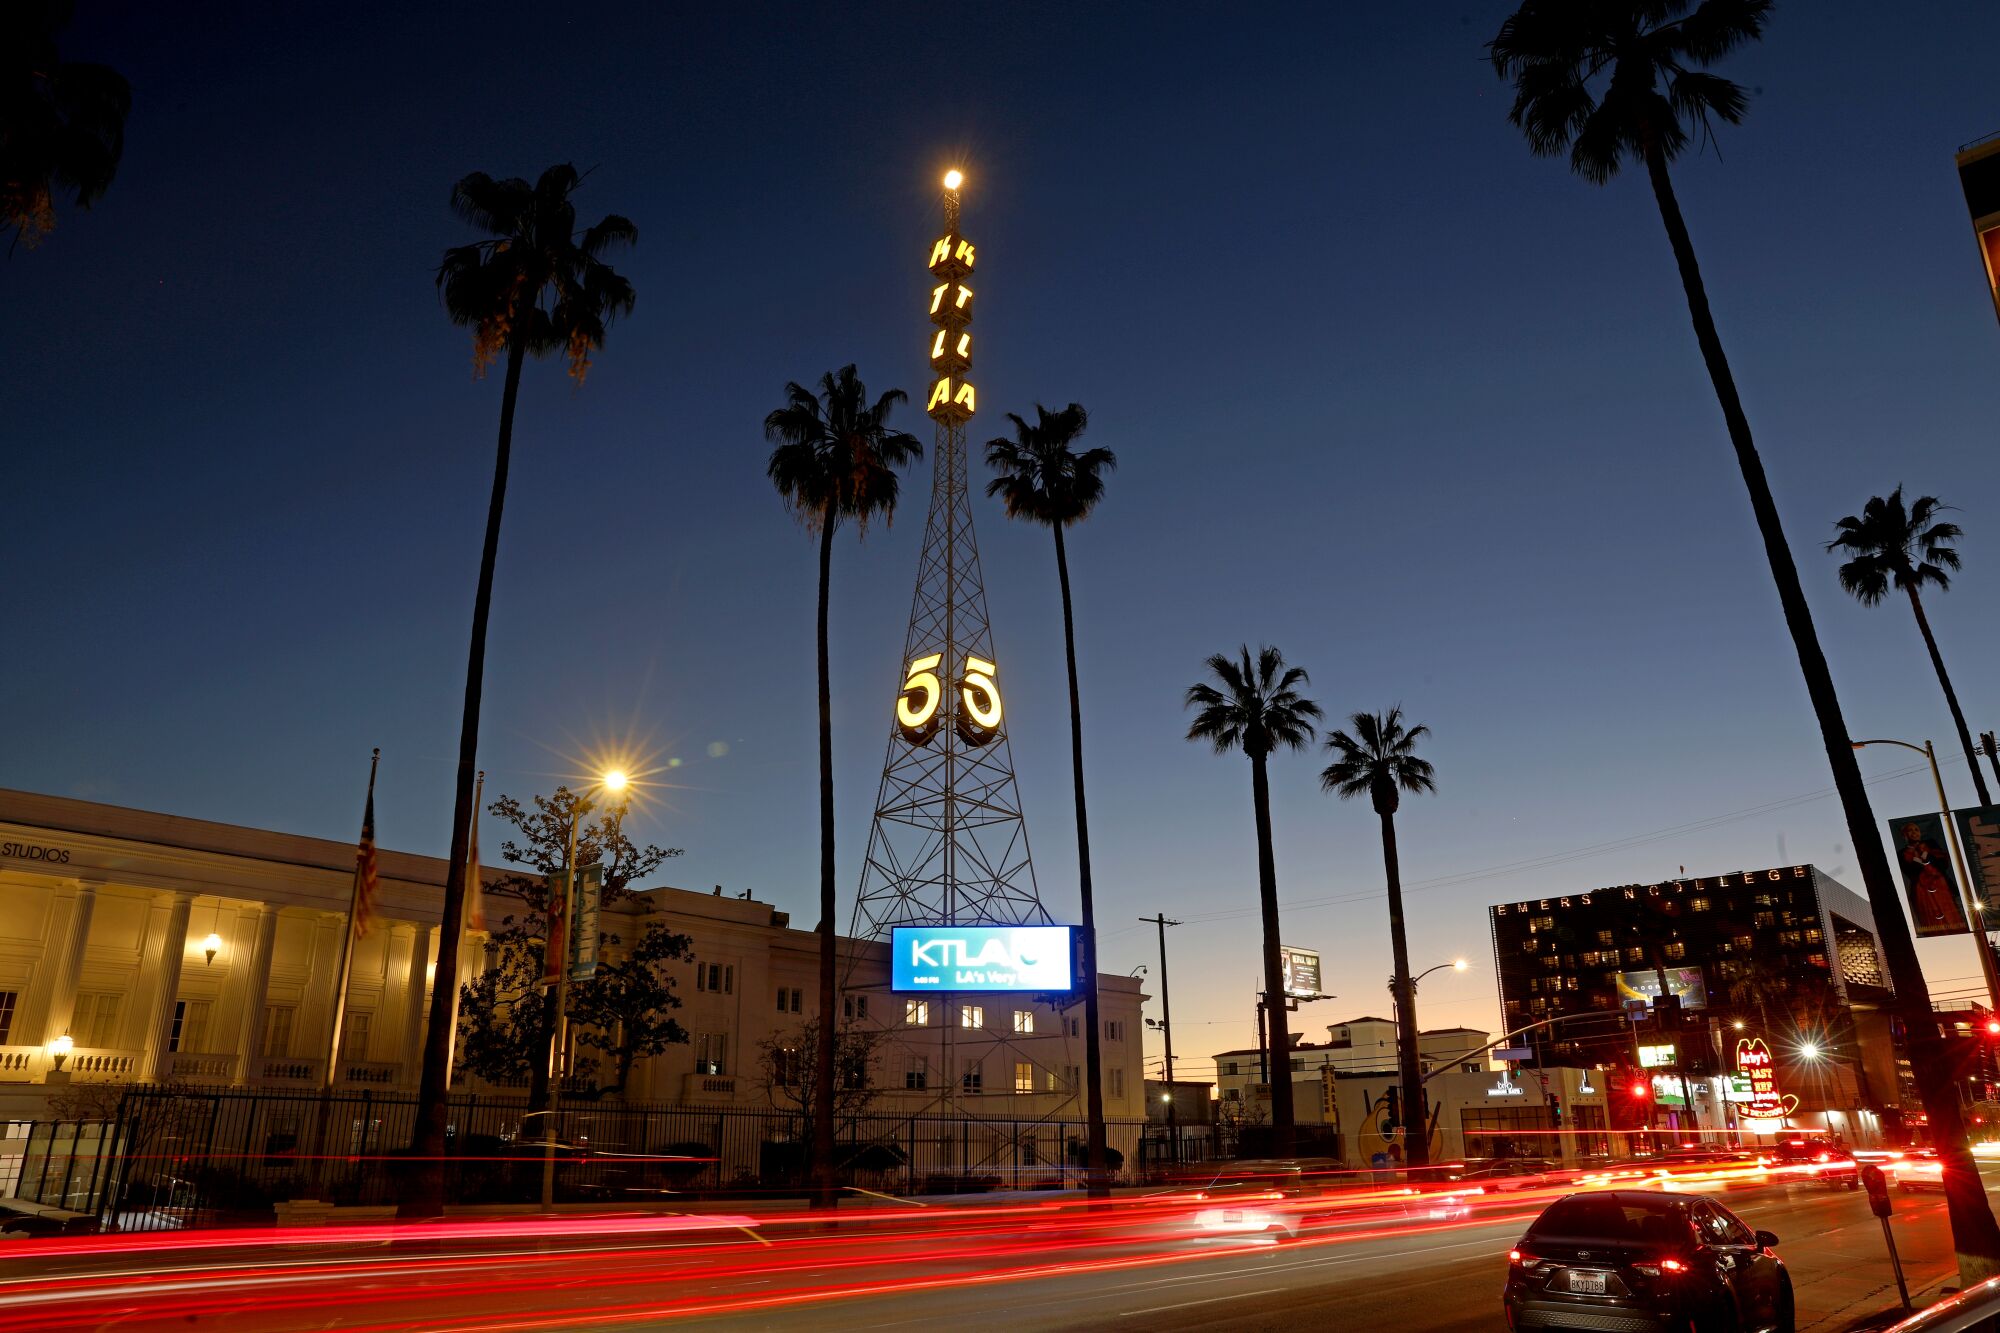 The KTLA-TV Channel 5 transmission tower in Hollywood, with cars zooming by as streaks of red light.